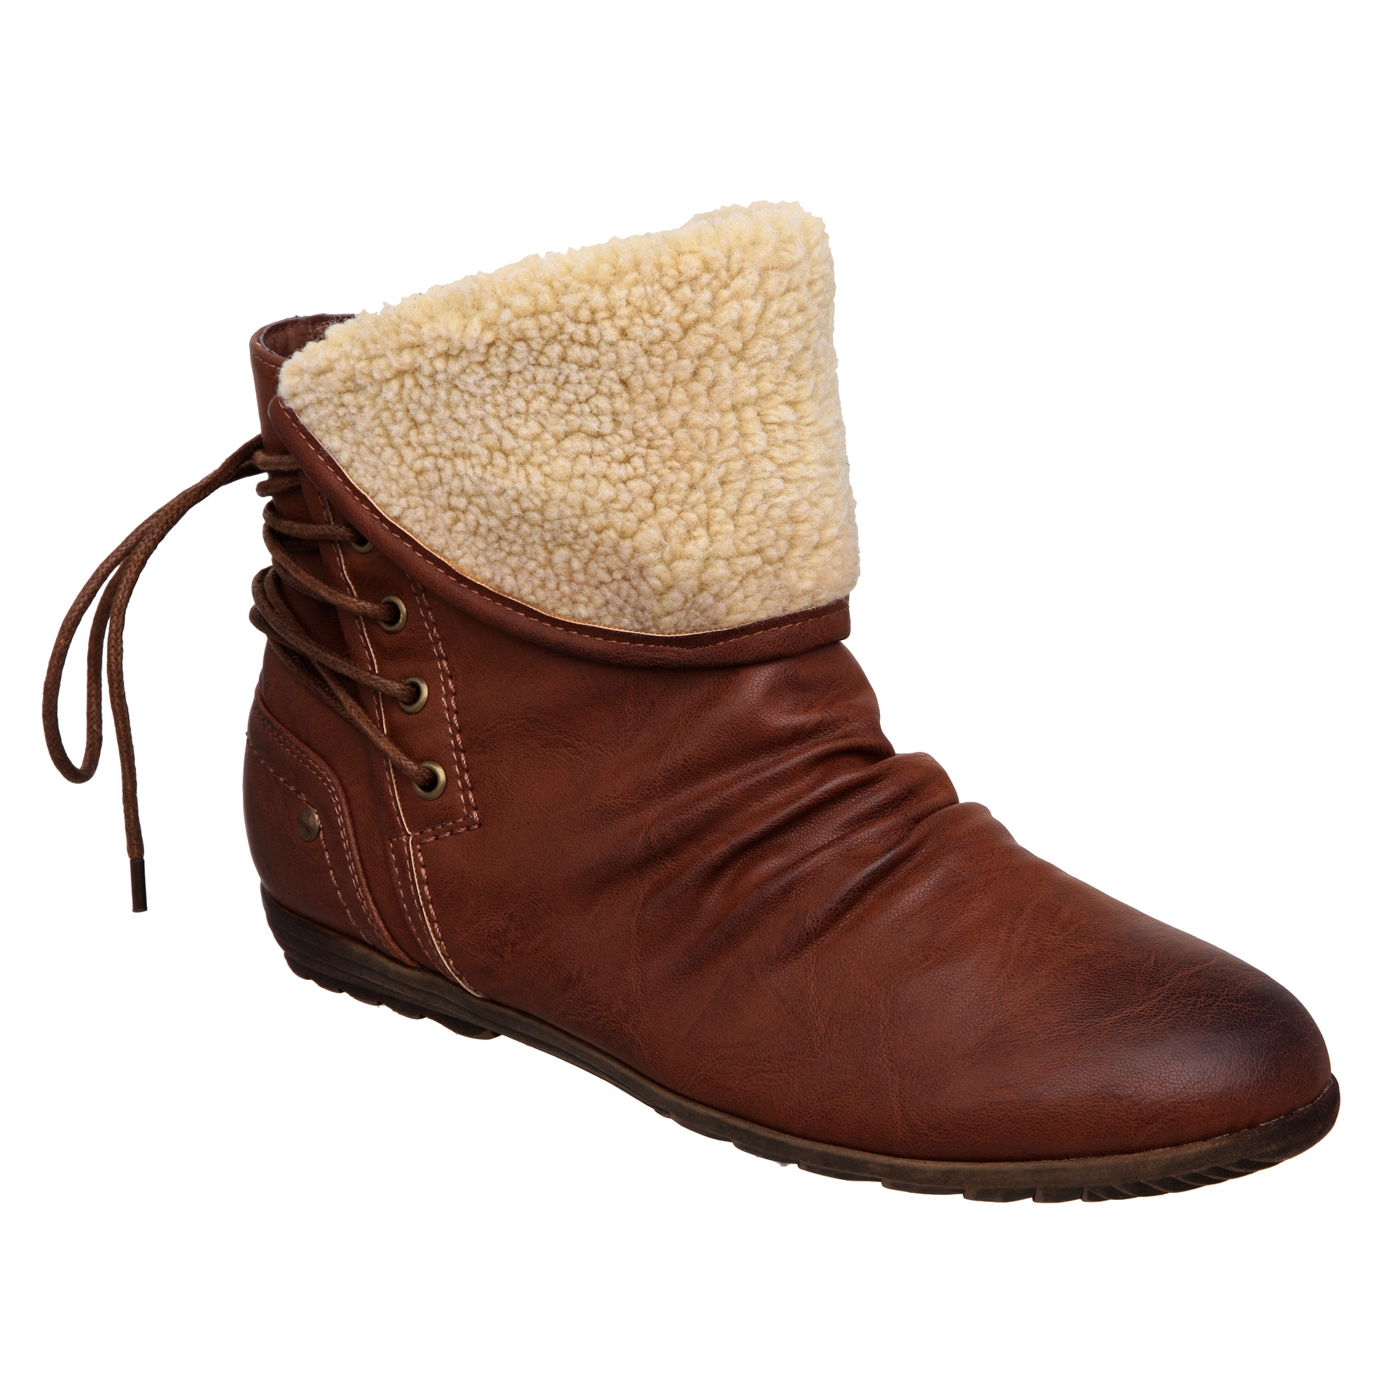 Roberto Vianni Tan pascala faux fur cuff lace up ankle boot